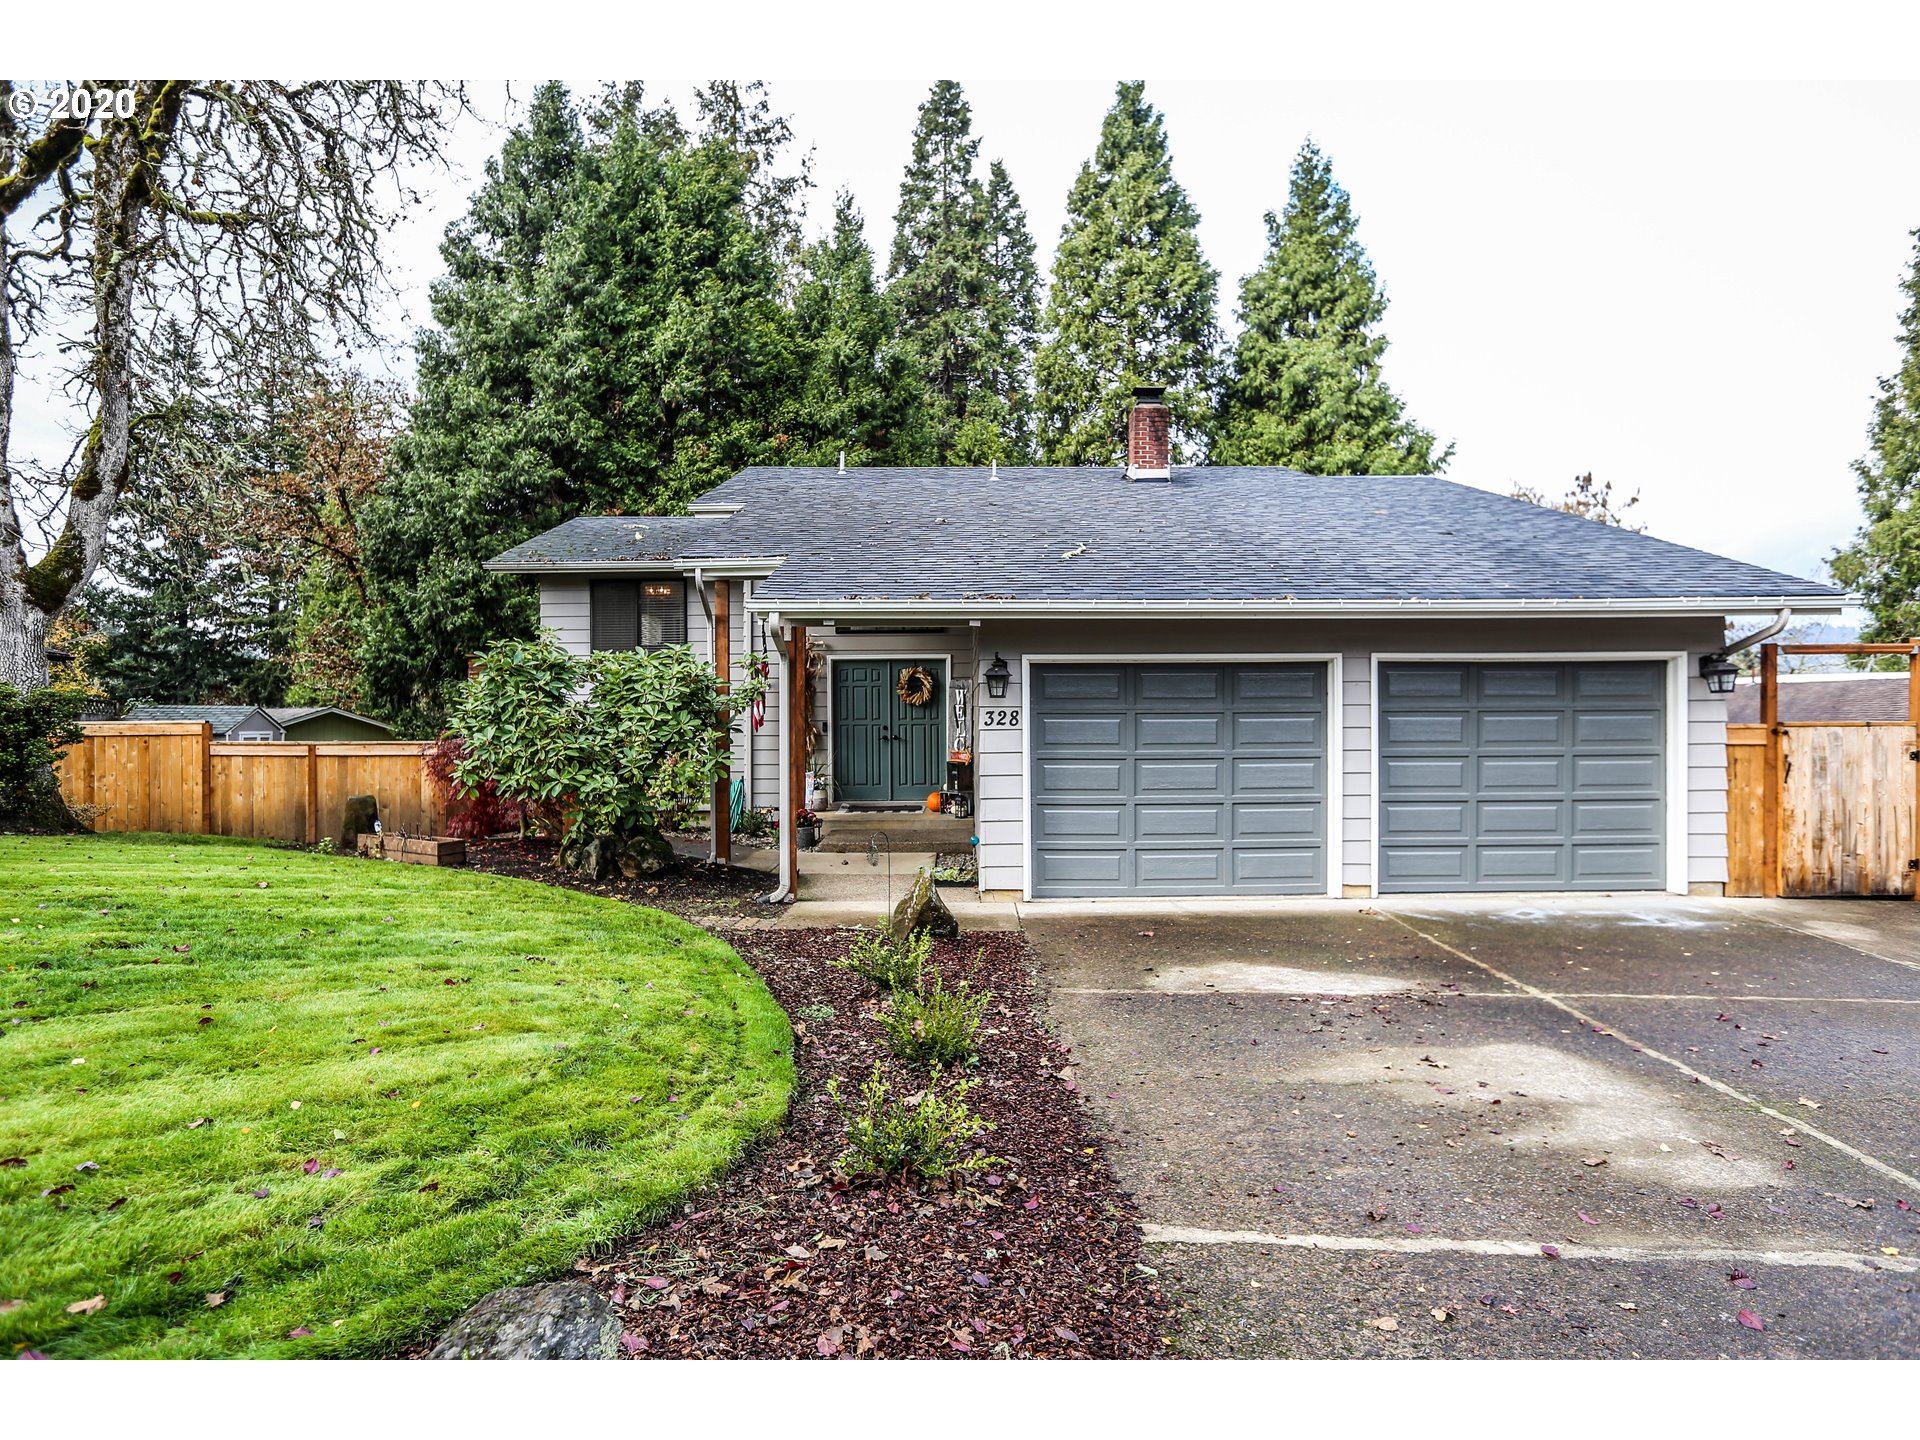 328 S 68TH PL (1 of 23)